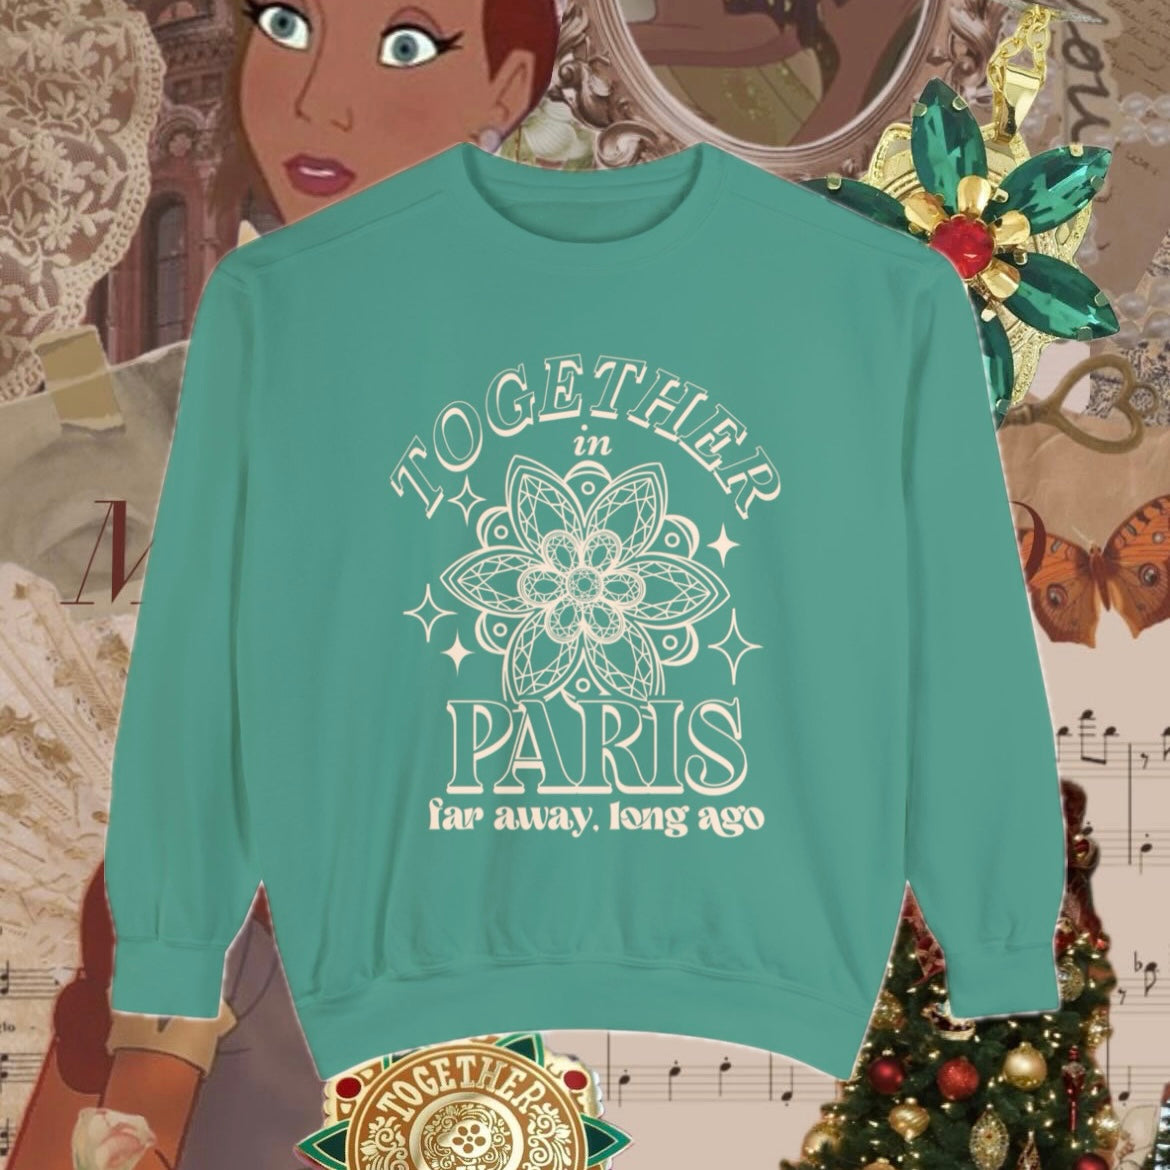 Together in Paris Sweater